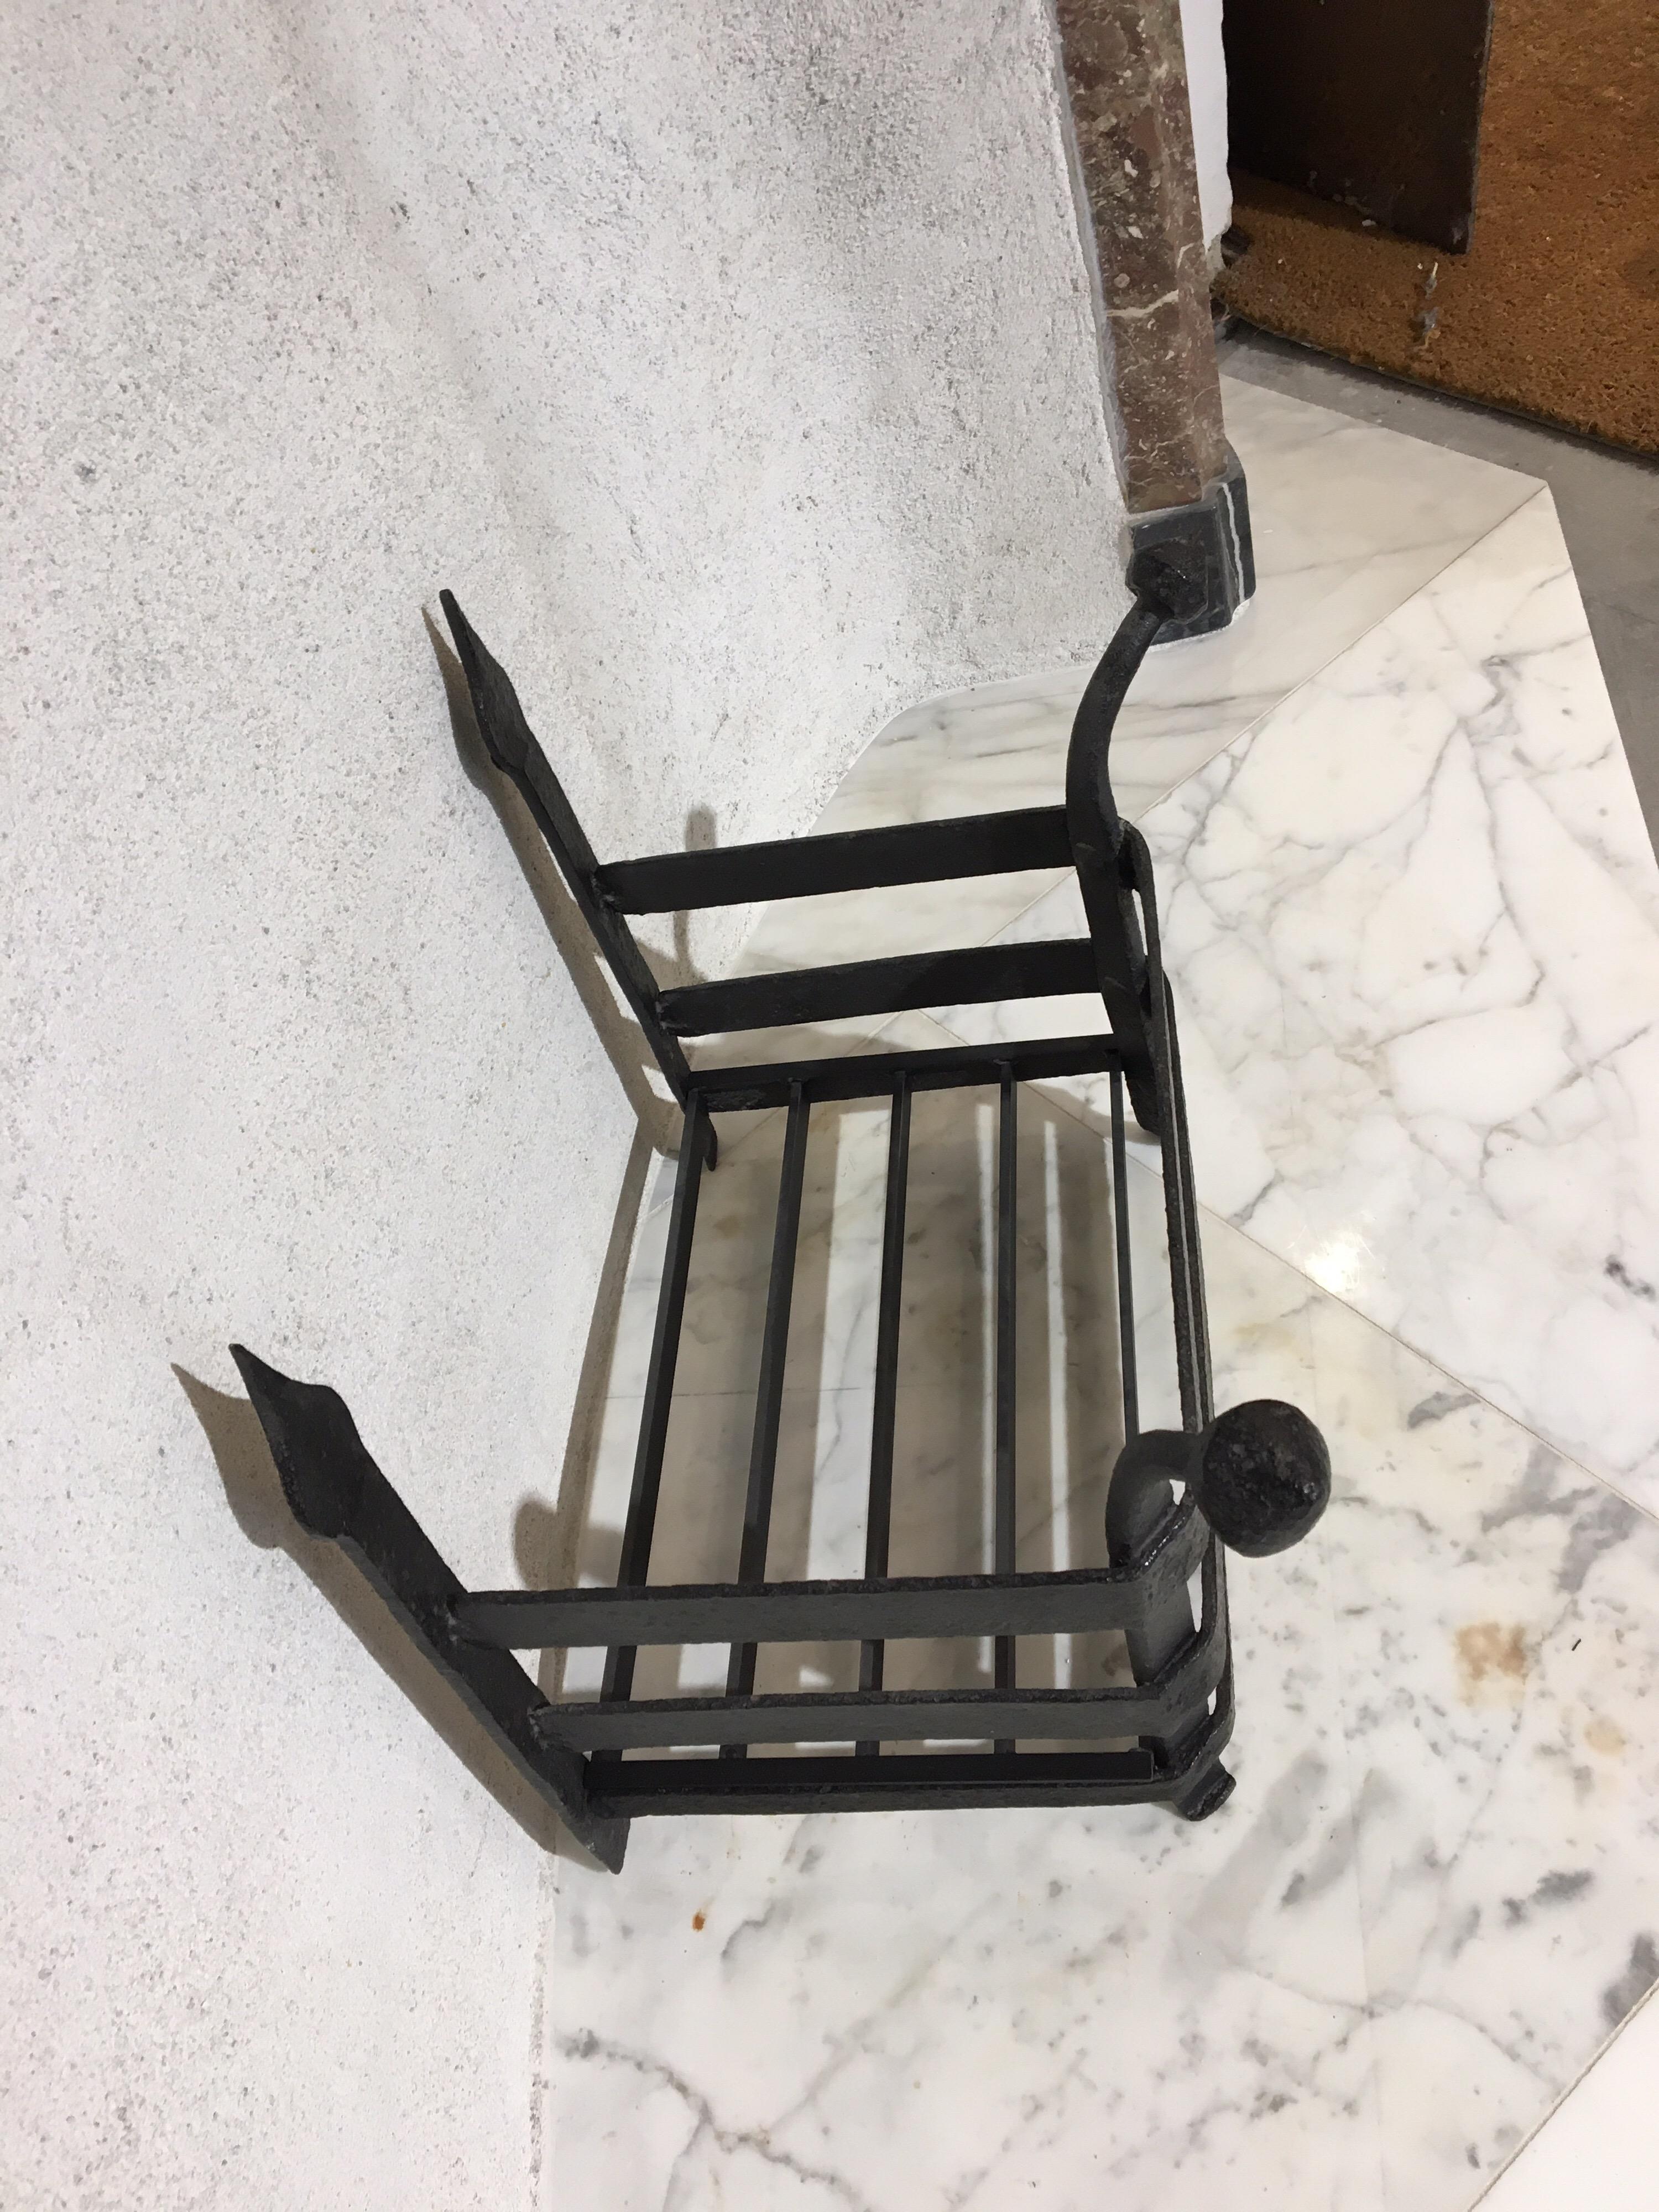 Iron Antique Fire Grate / Fireplace Grate For Sale